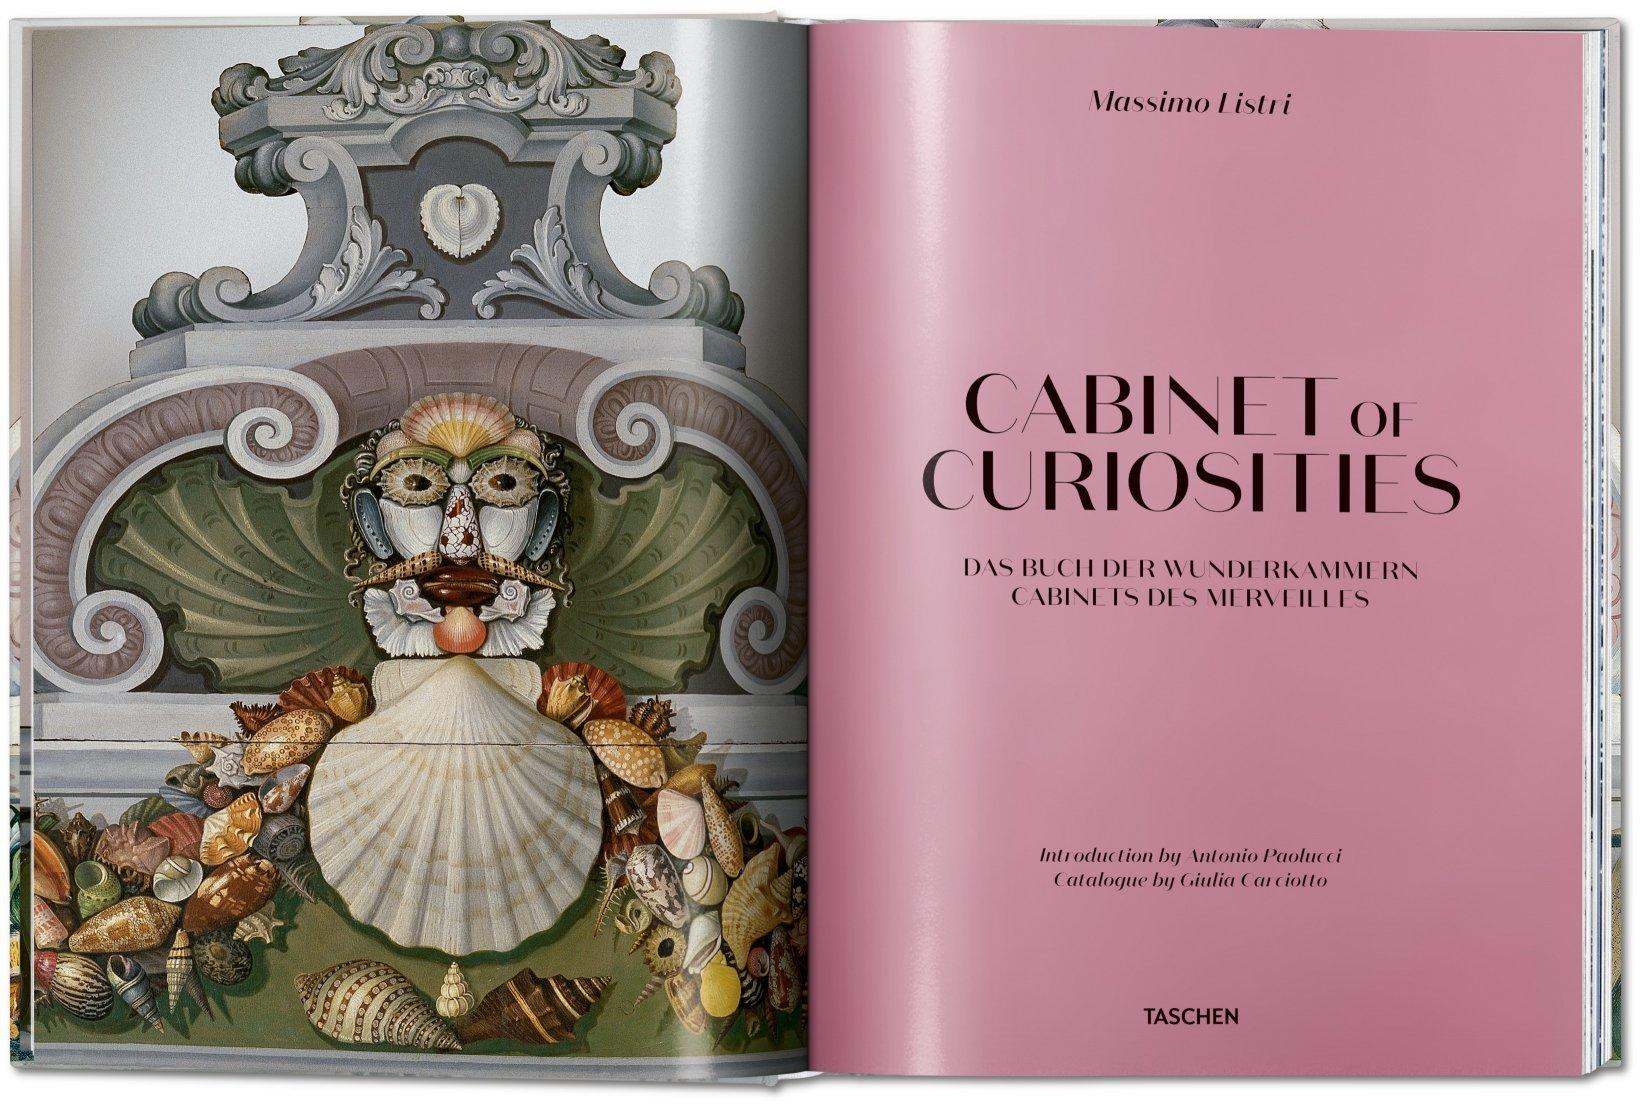 Cabinets of curiosities fascinated people of the 16th and 17th centuries. From crocodiles, minerals, and corals to paintings, ivory trophies, measuring instruments, and incredible automata, it was a glimpse into a world full of natural wonders and